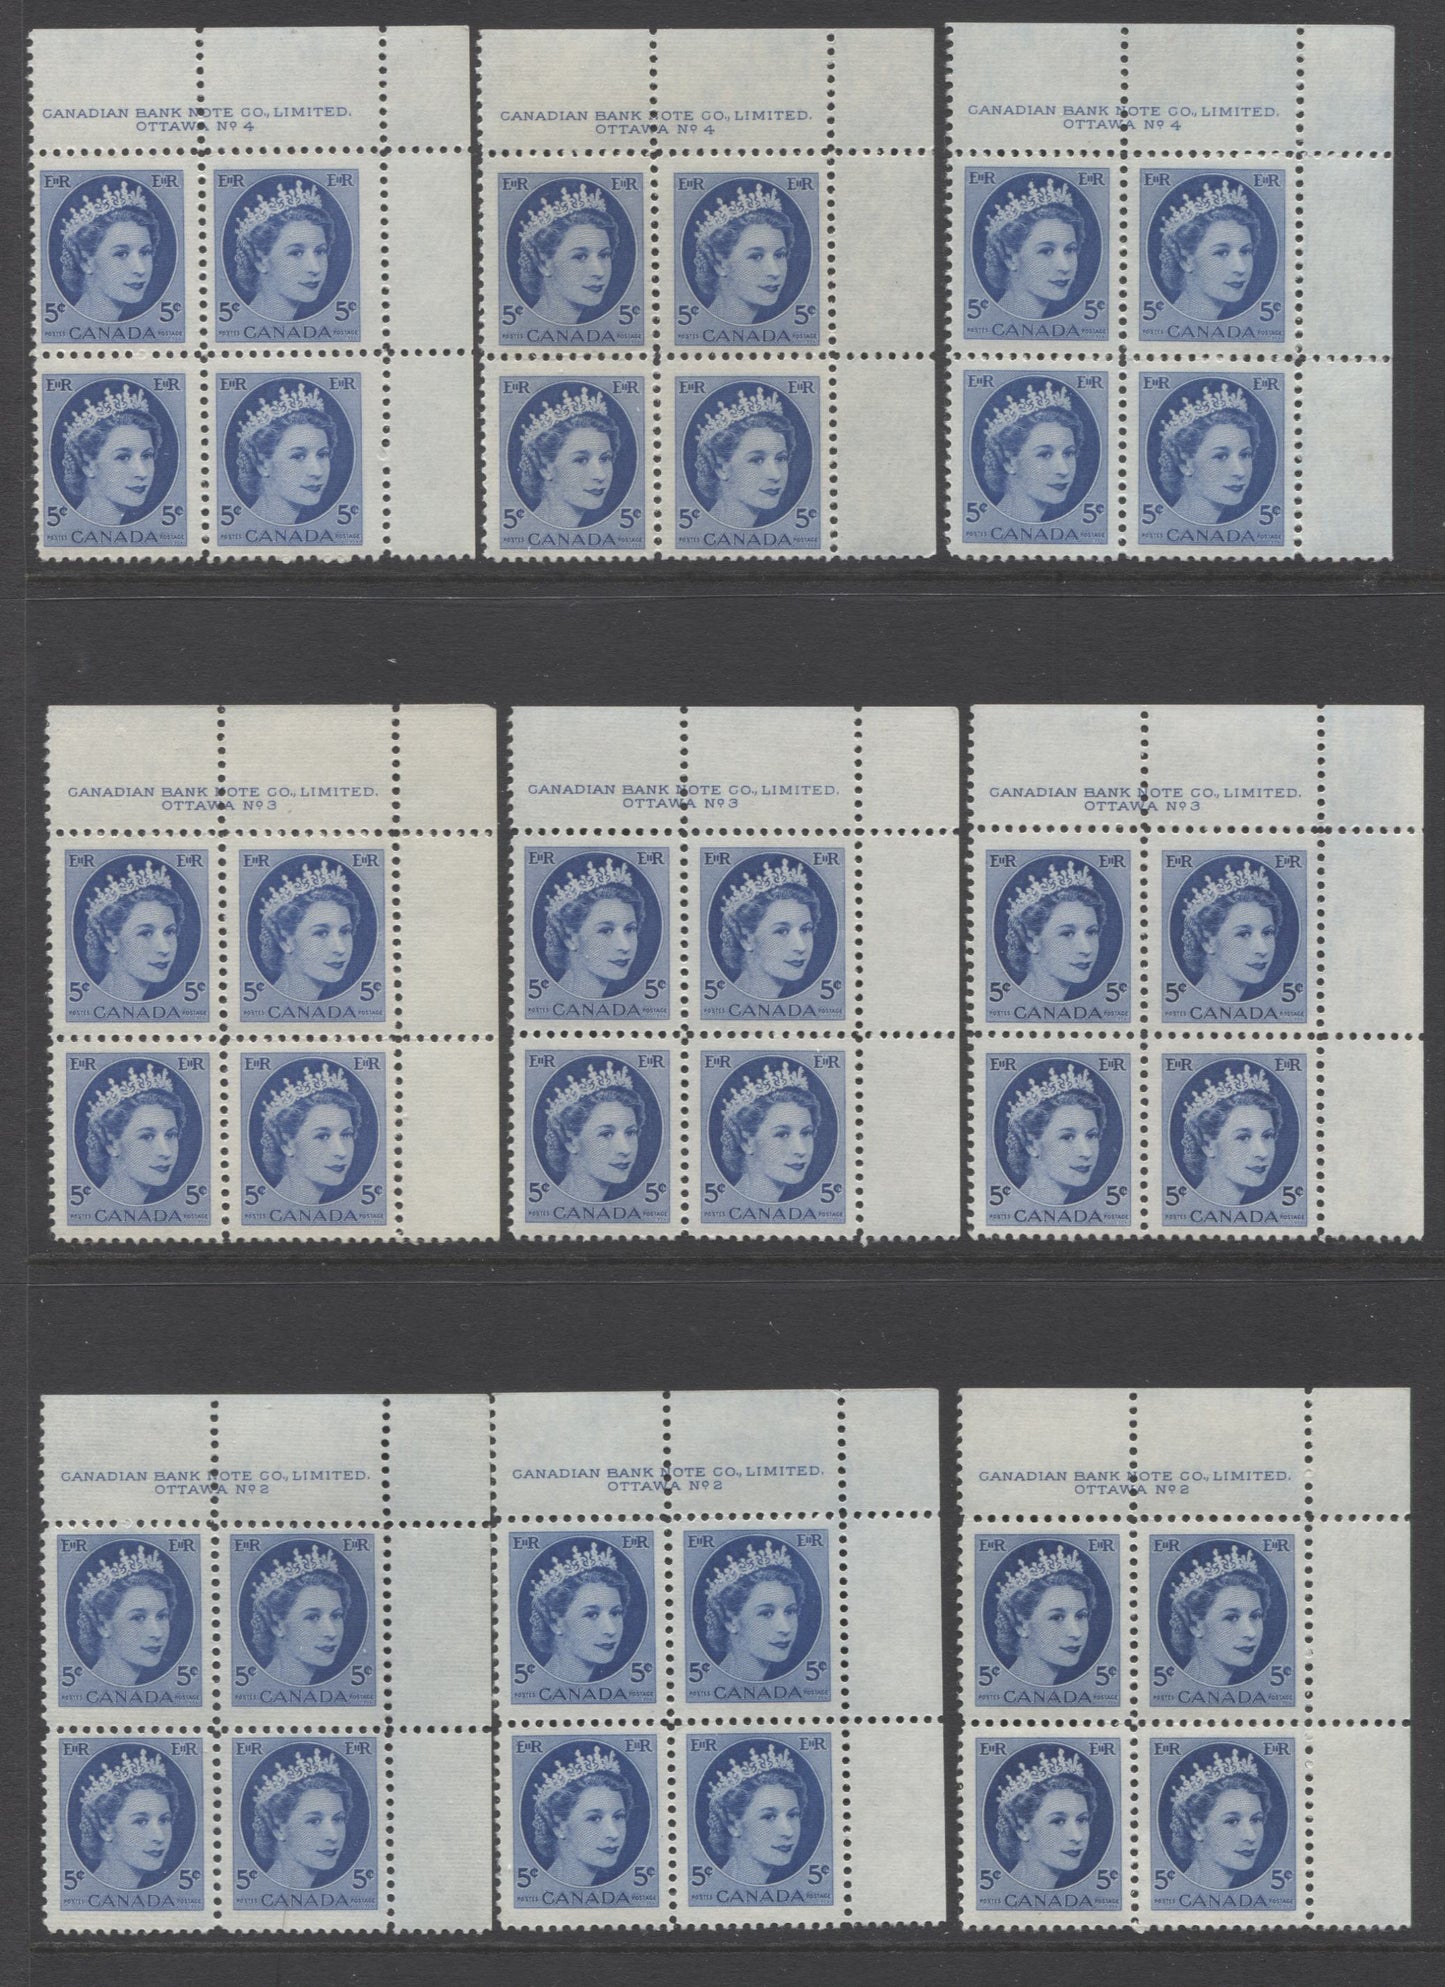 Lot 86 Canada #341 5c Bright Blue, 1954 Queen Elizabeth 2 - Wilding Portrait Issue, 24 F-VF NH UR Plates 1-7 Blocks Of 4 All DF Paper, Various Papers And Shades